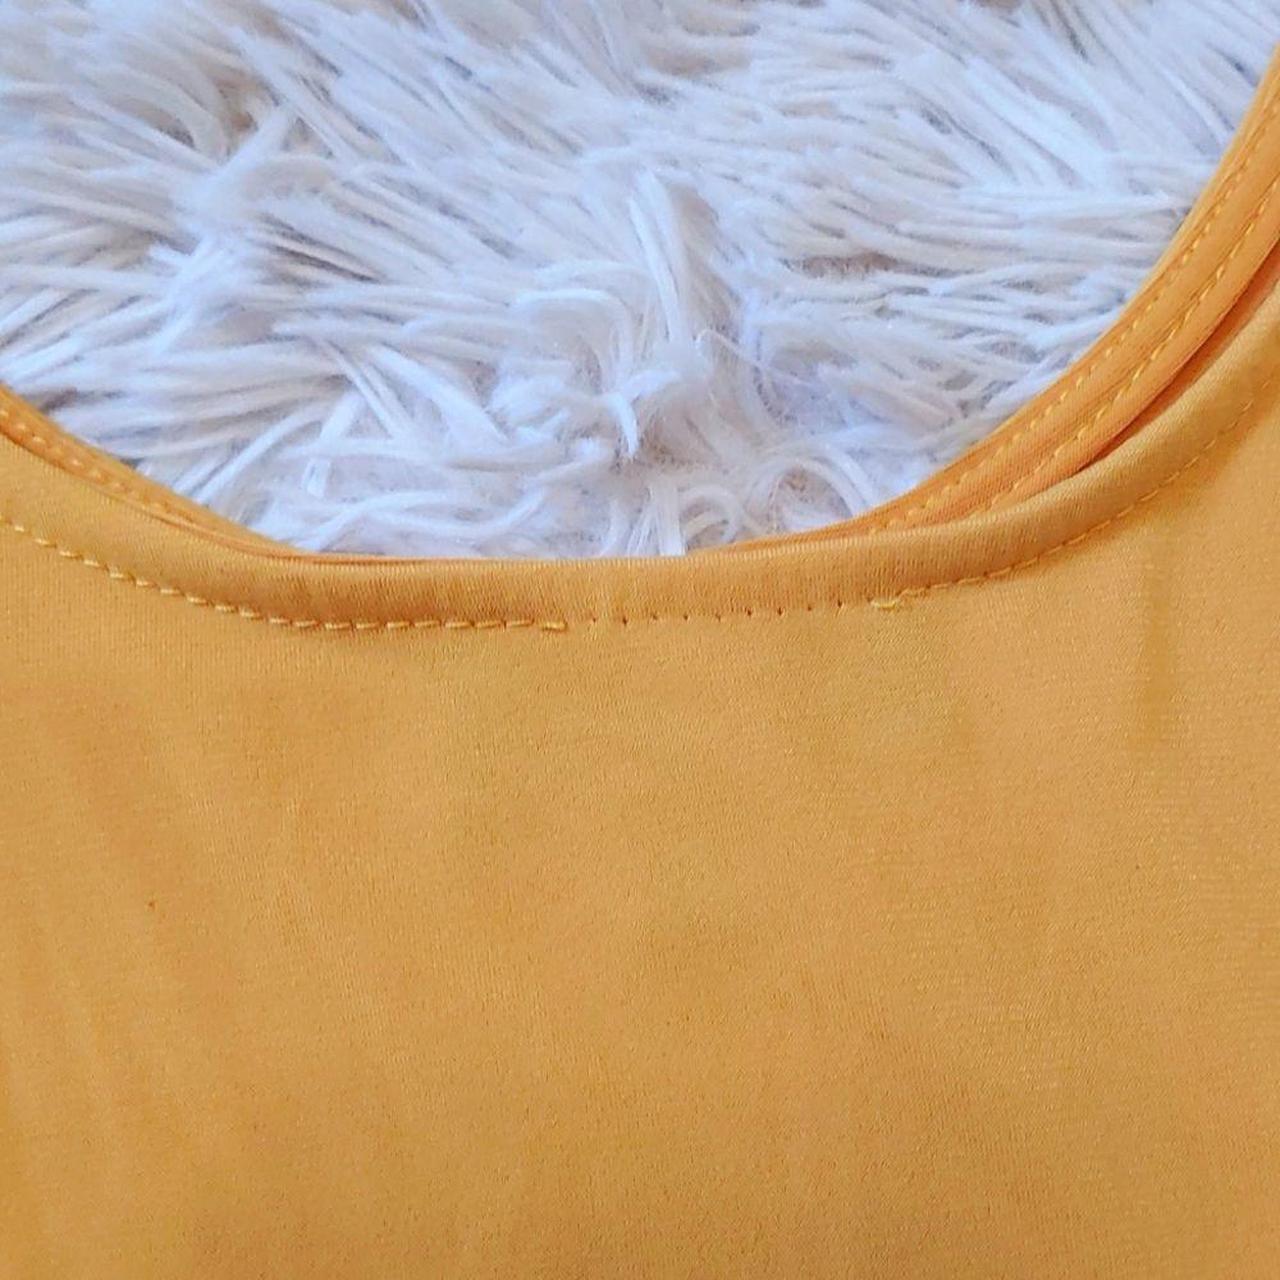 Product Image 3 - Modcloth bodysuit!

Mustard yellow.

Scoop neck front